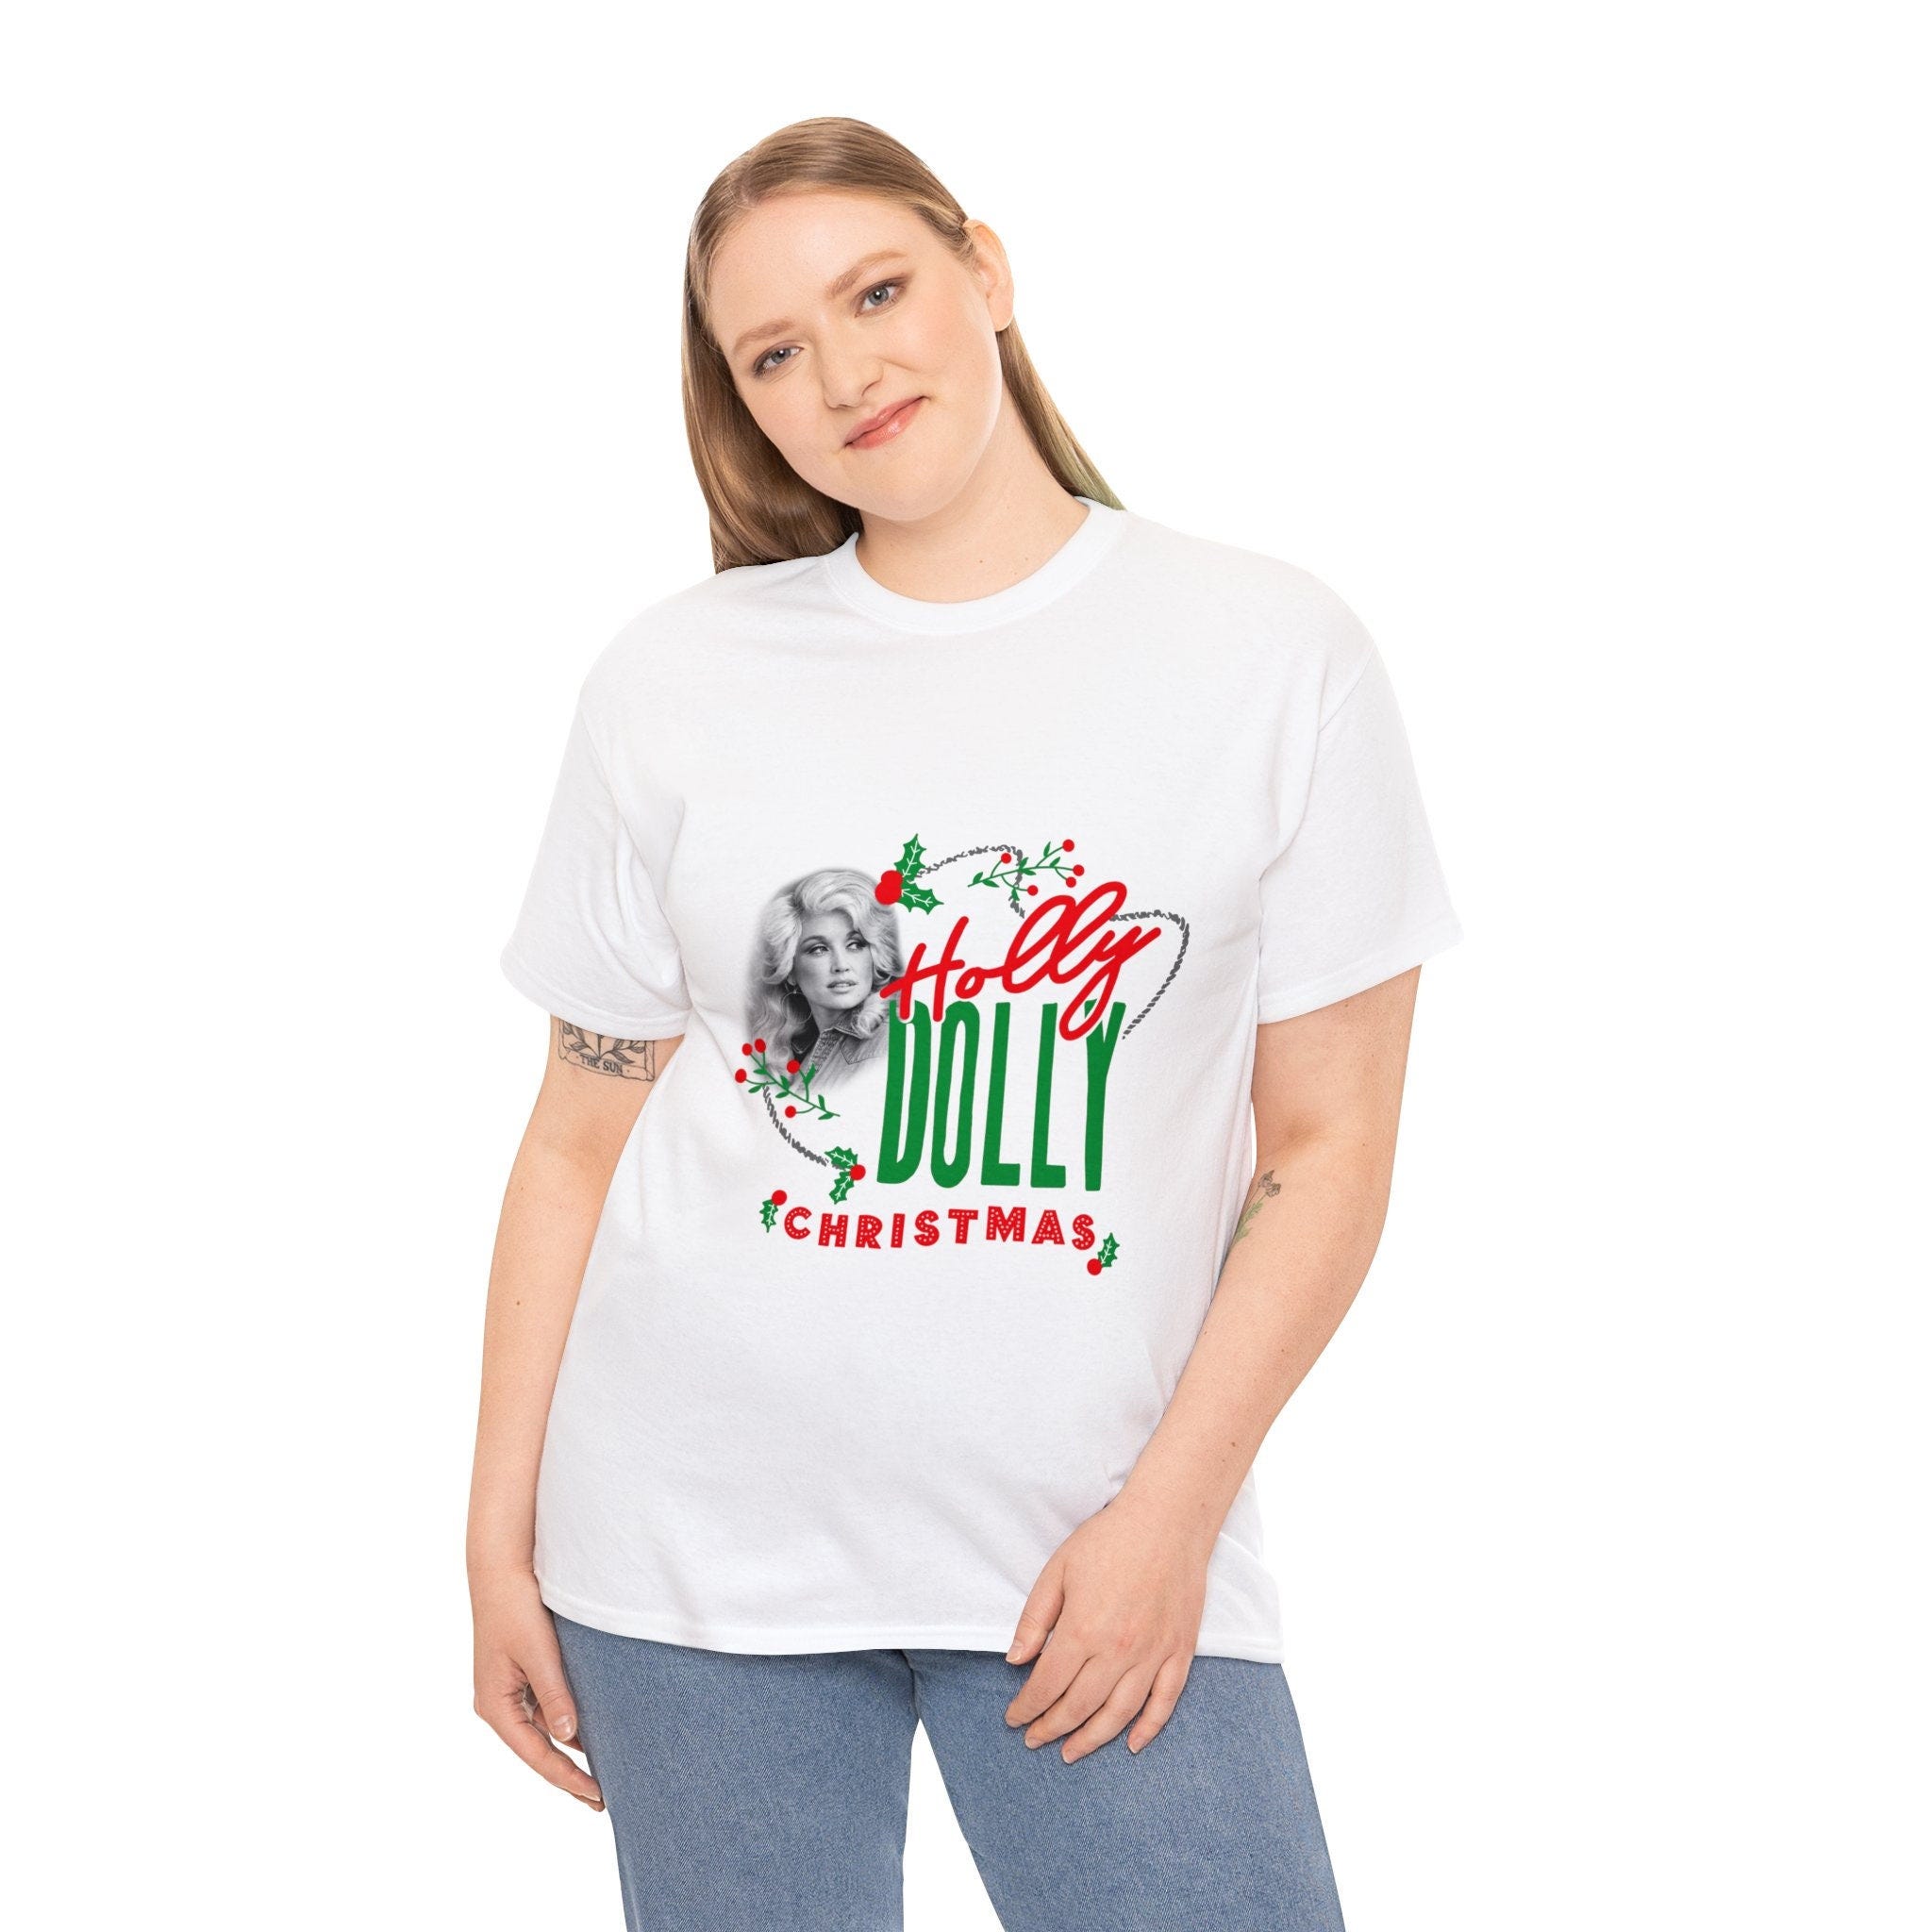 Have a Holly Dolly Christmas Shirt, Western Christmas Tshirt, Holly Dolly Christmas shirt, Cowgirl shirt